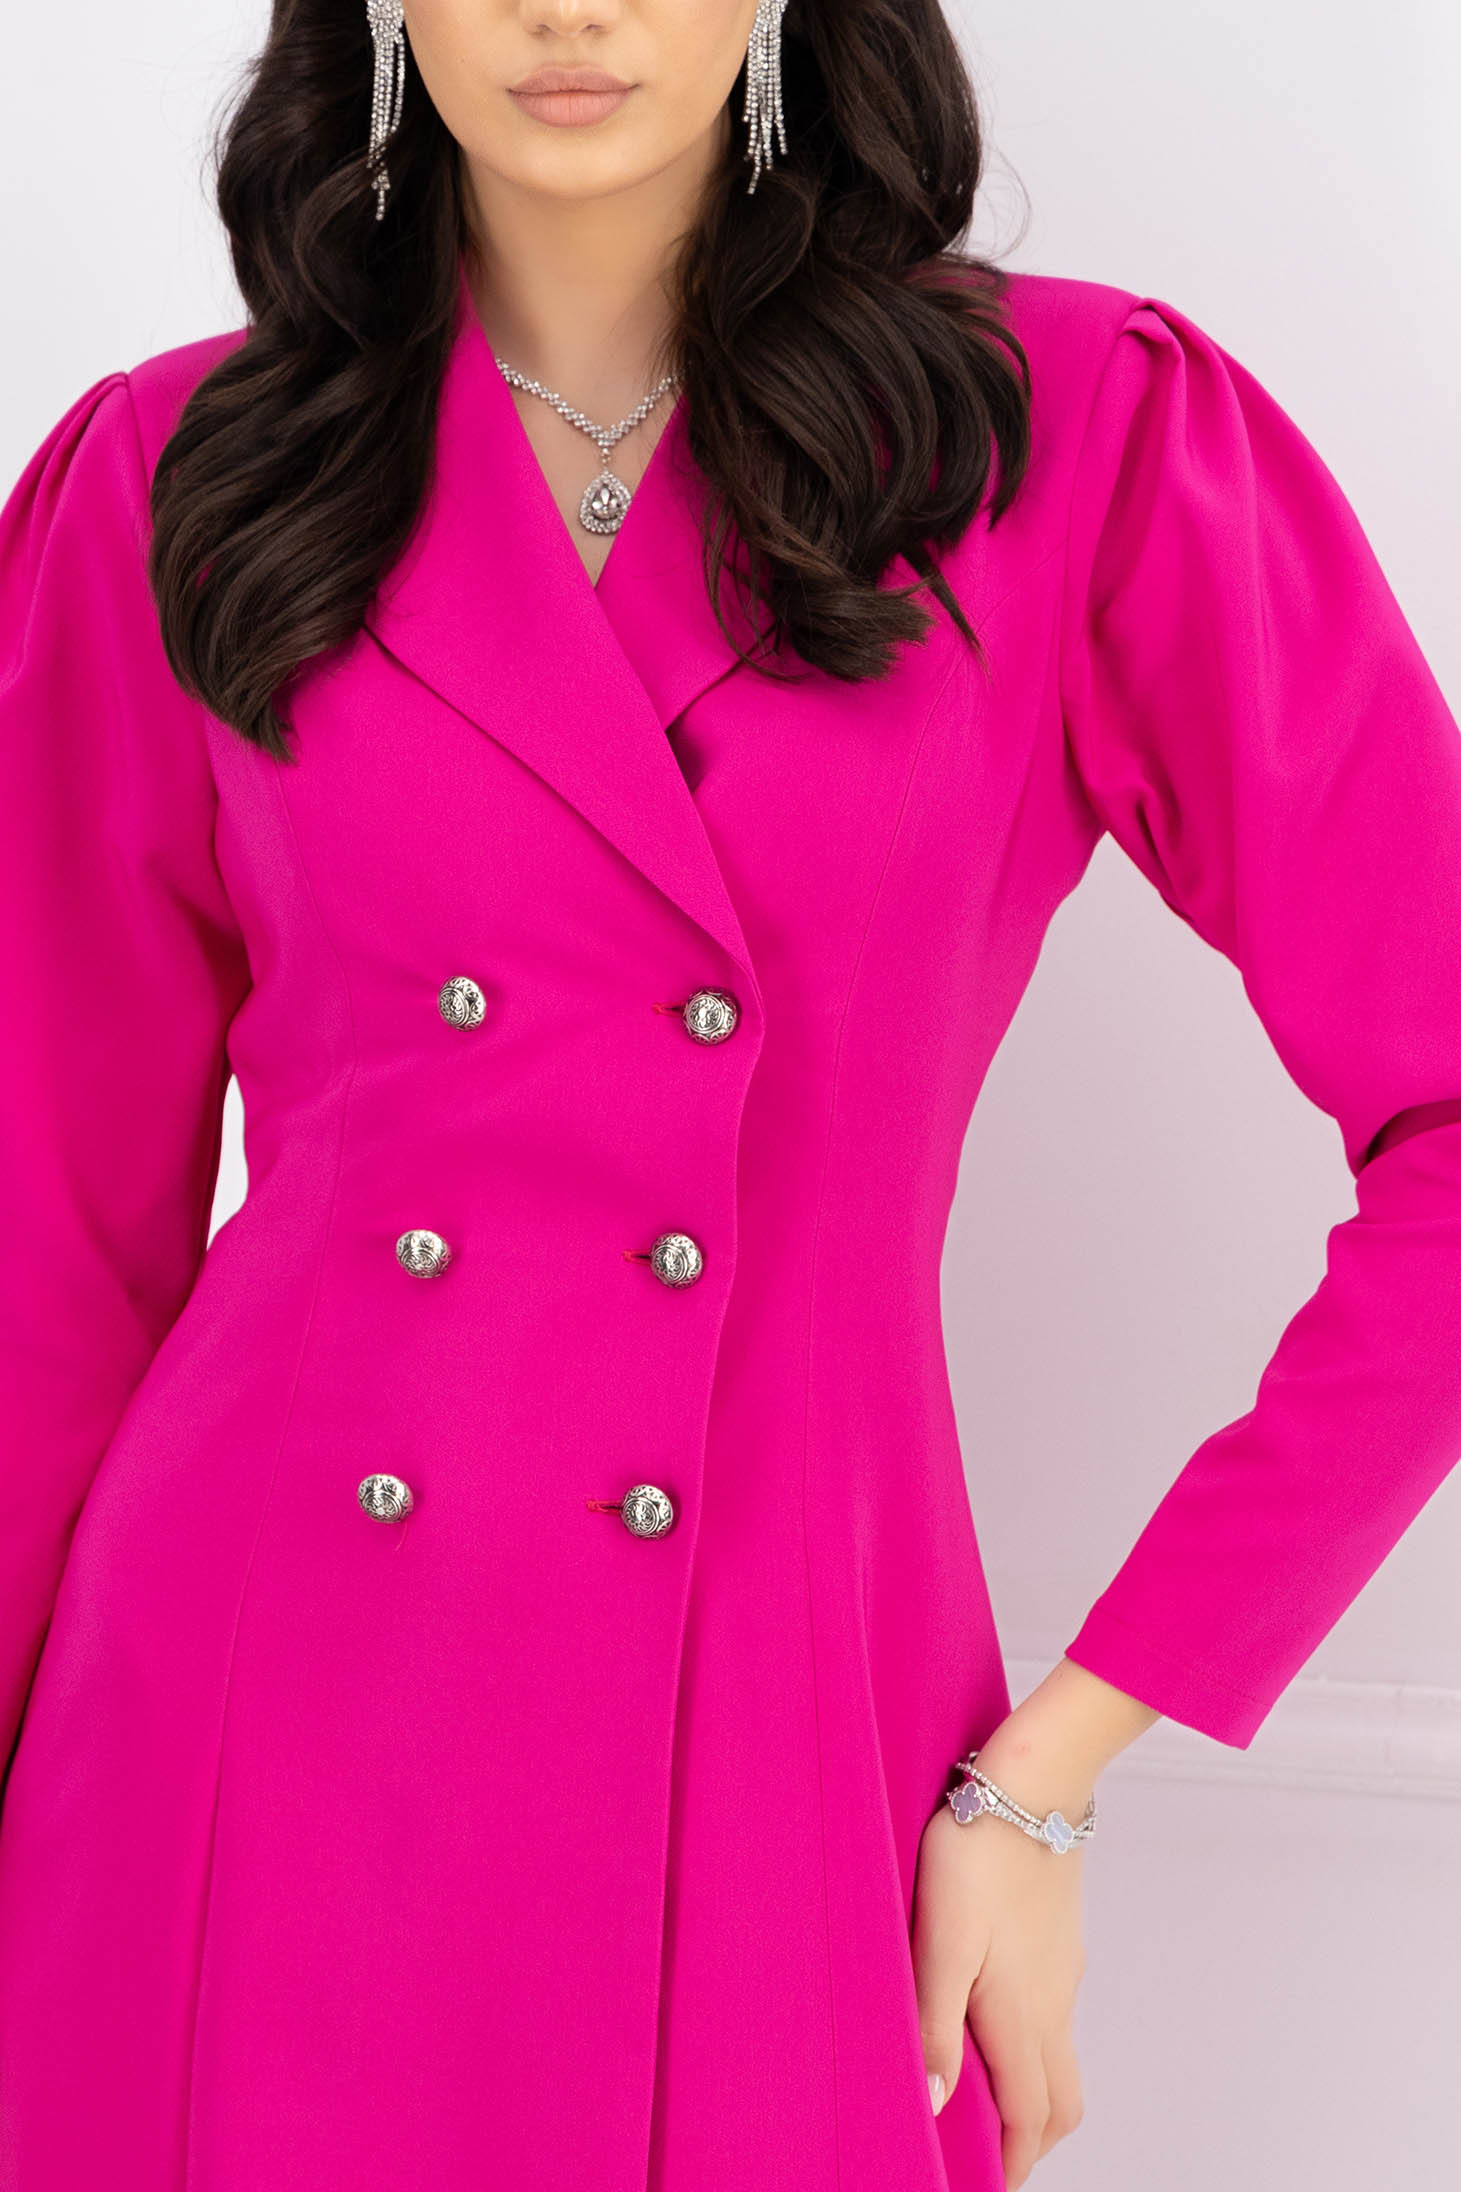 Fuchsia Jacket Dress made of slightly elastic fabric with decorative buttons and puffy shoulders - StarShinerS 4 - StarShinerS.com